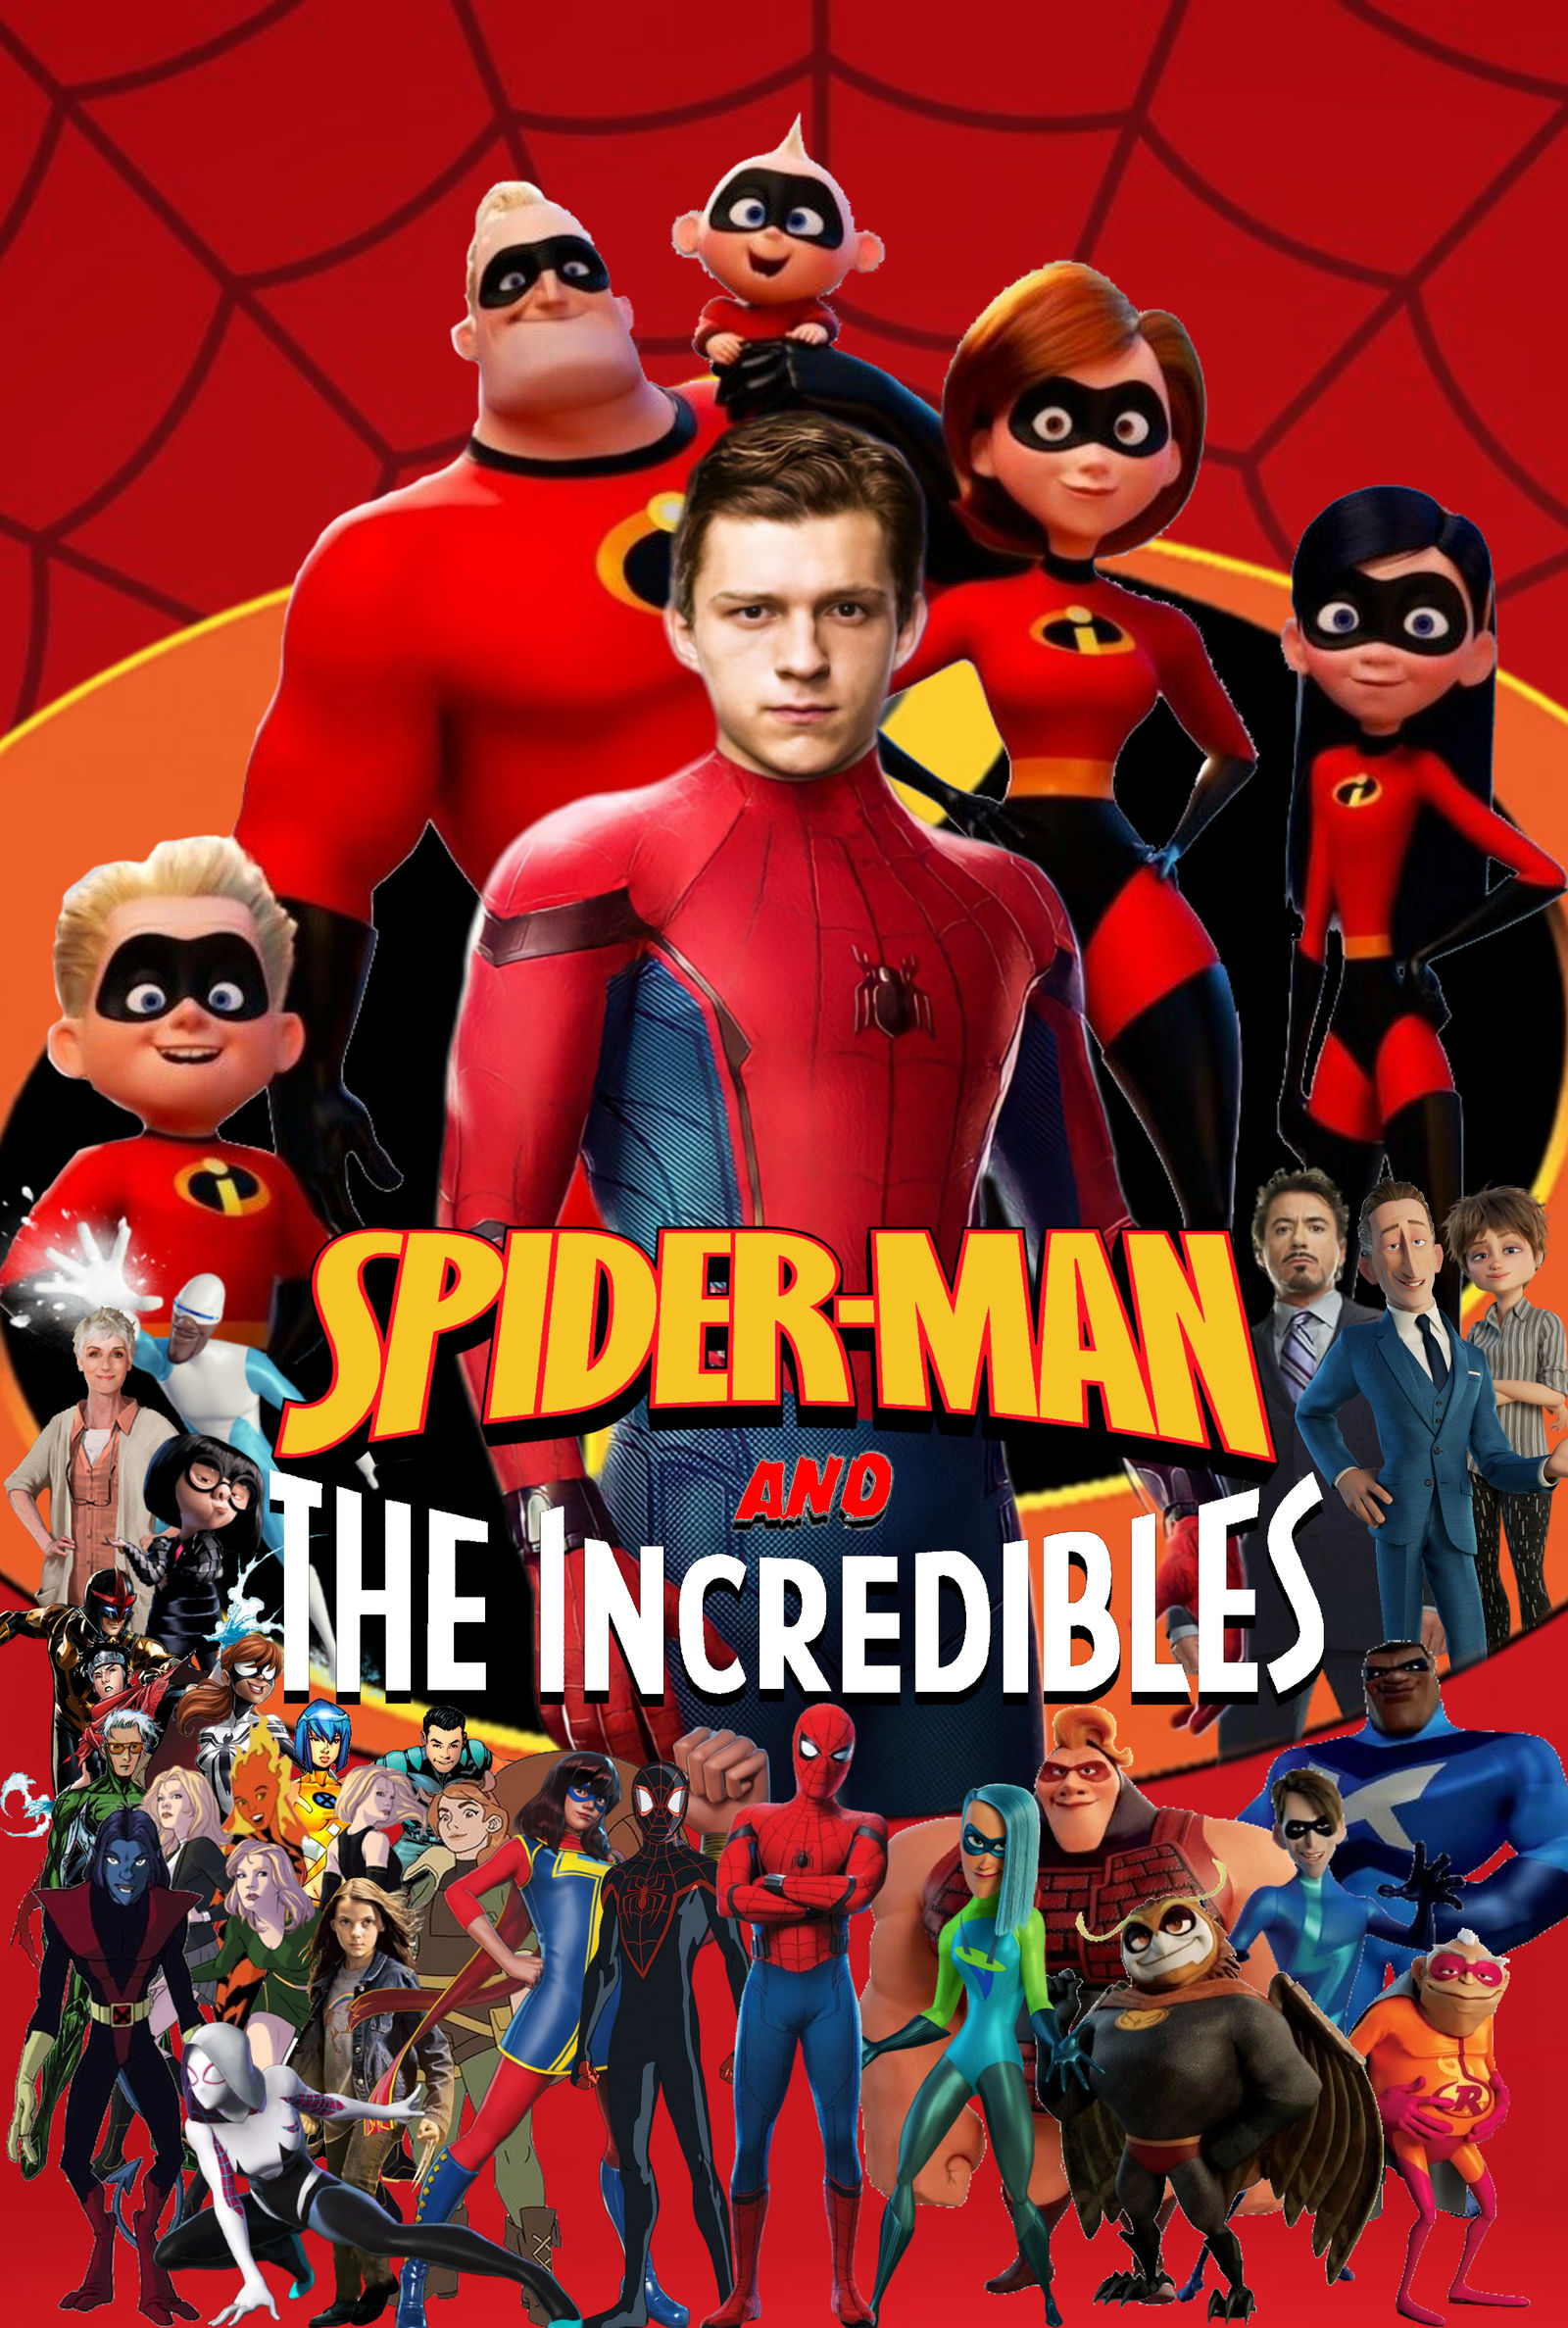 Spider-Man and The Incredibles by AwesomeOKingGuy on DeviantArt